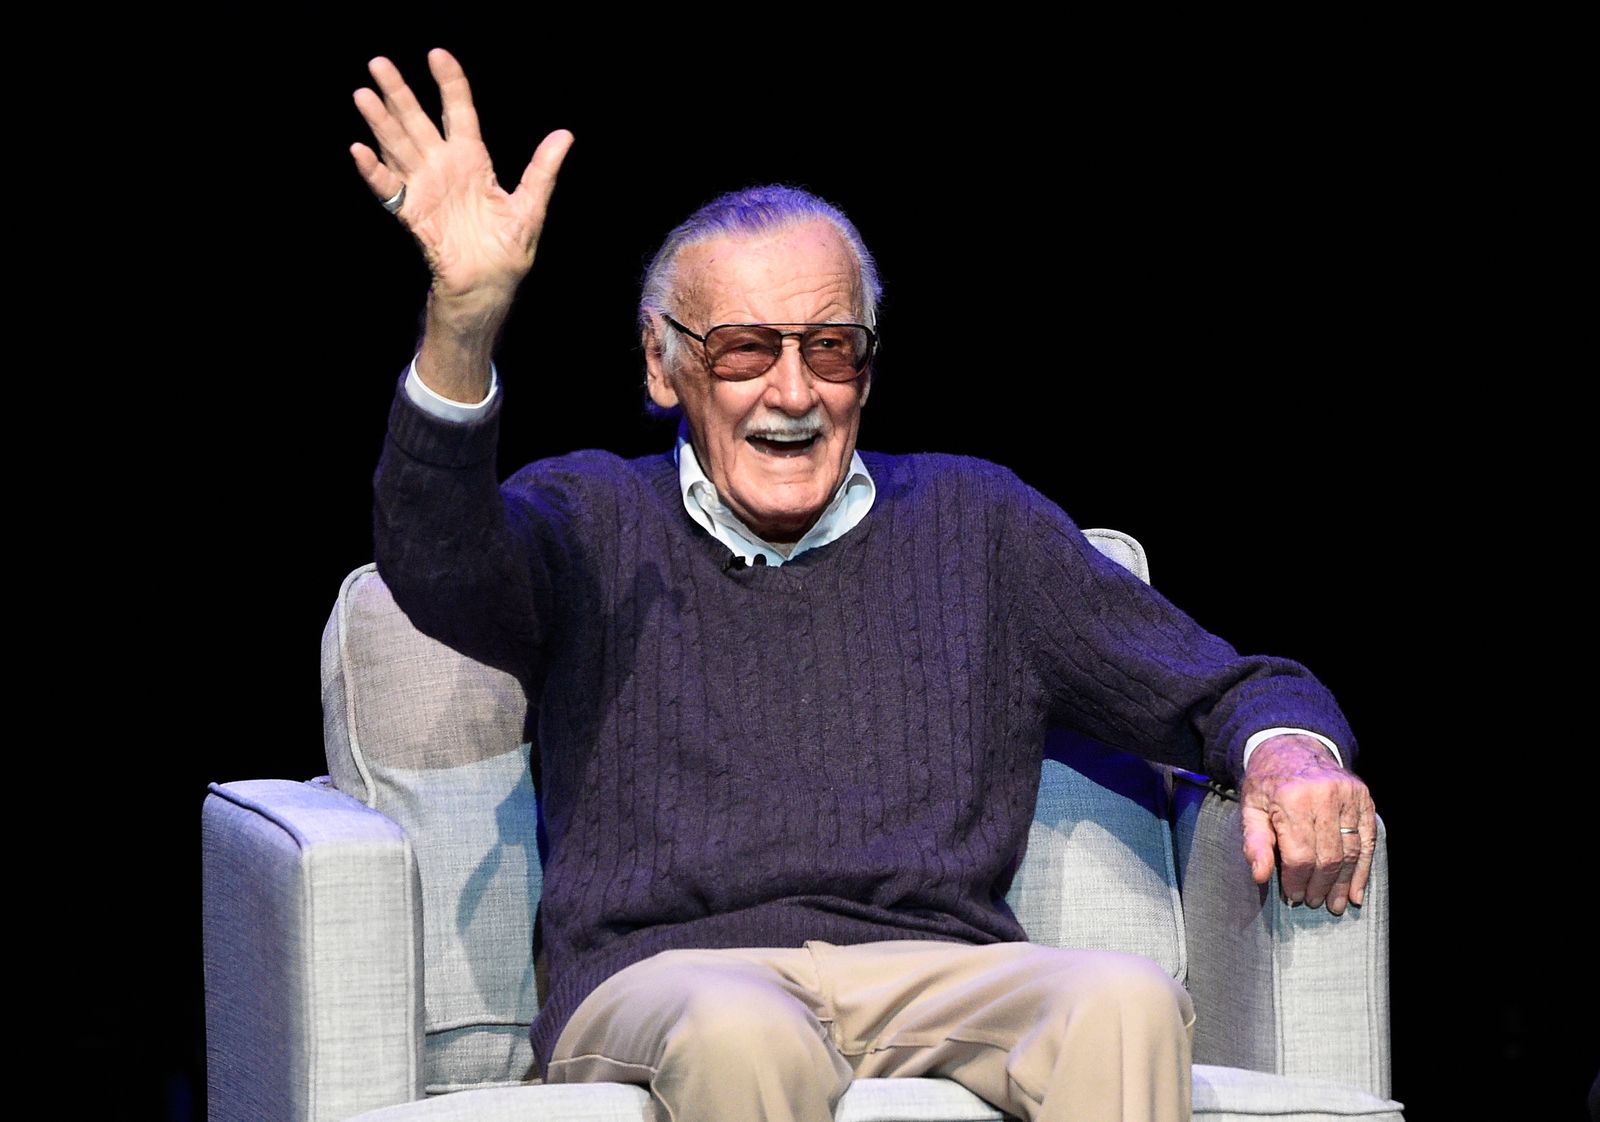 A Letter to Stan Lee, Comic Book Legend, Written by One of His Biggest Fans | Arts & Culture| Smithsonian Magazine